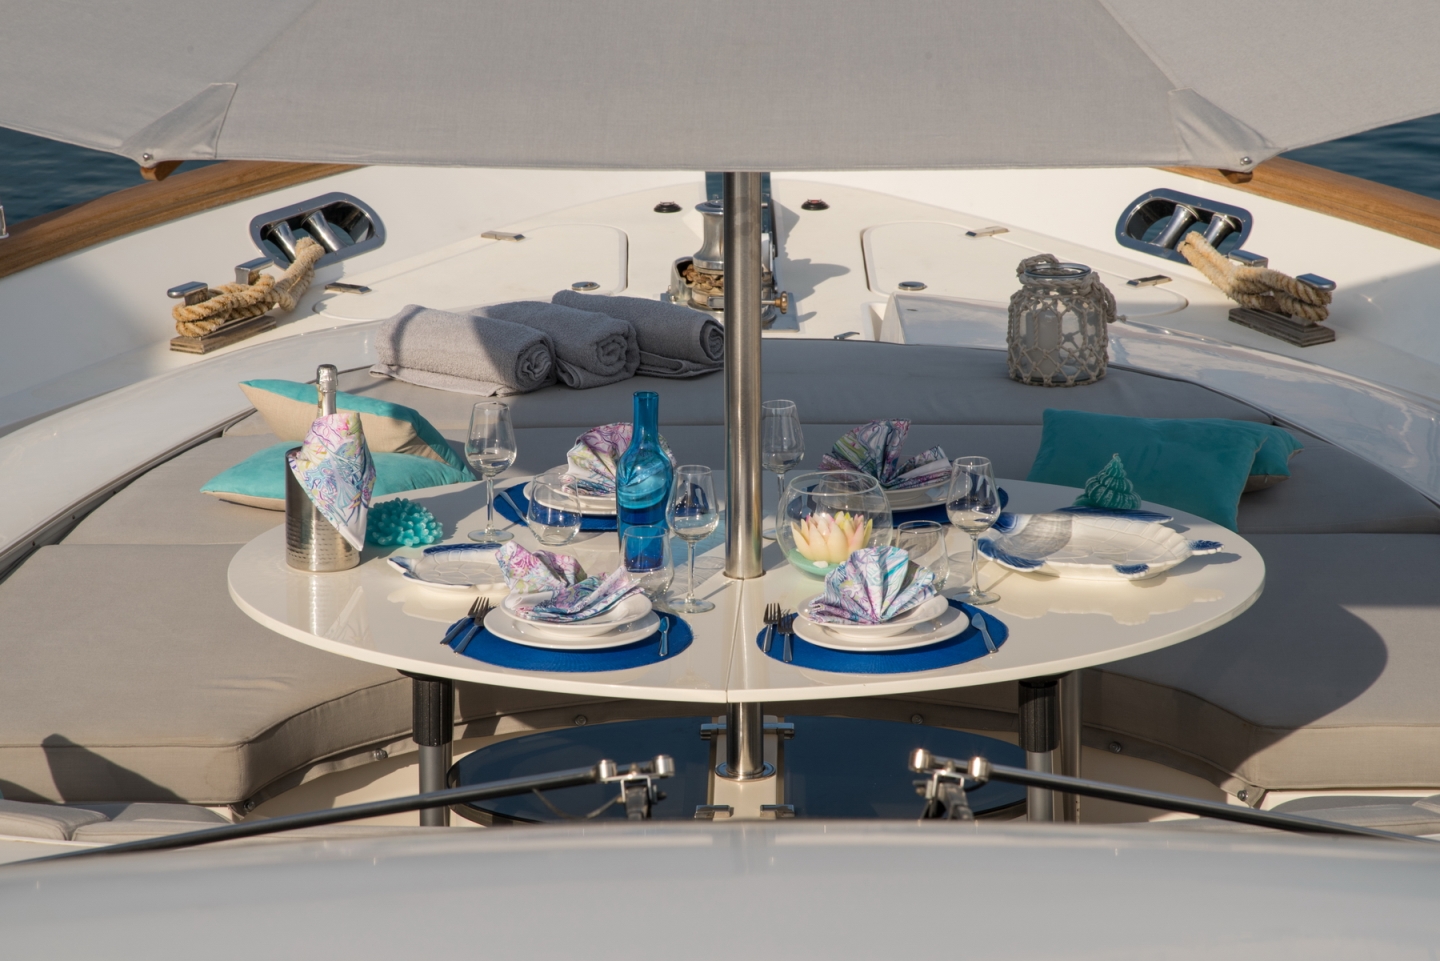 Foredeck Dining